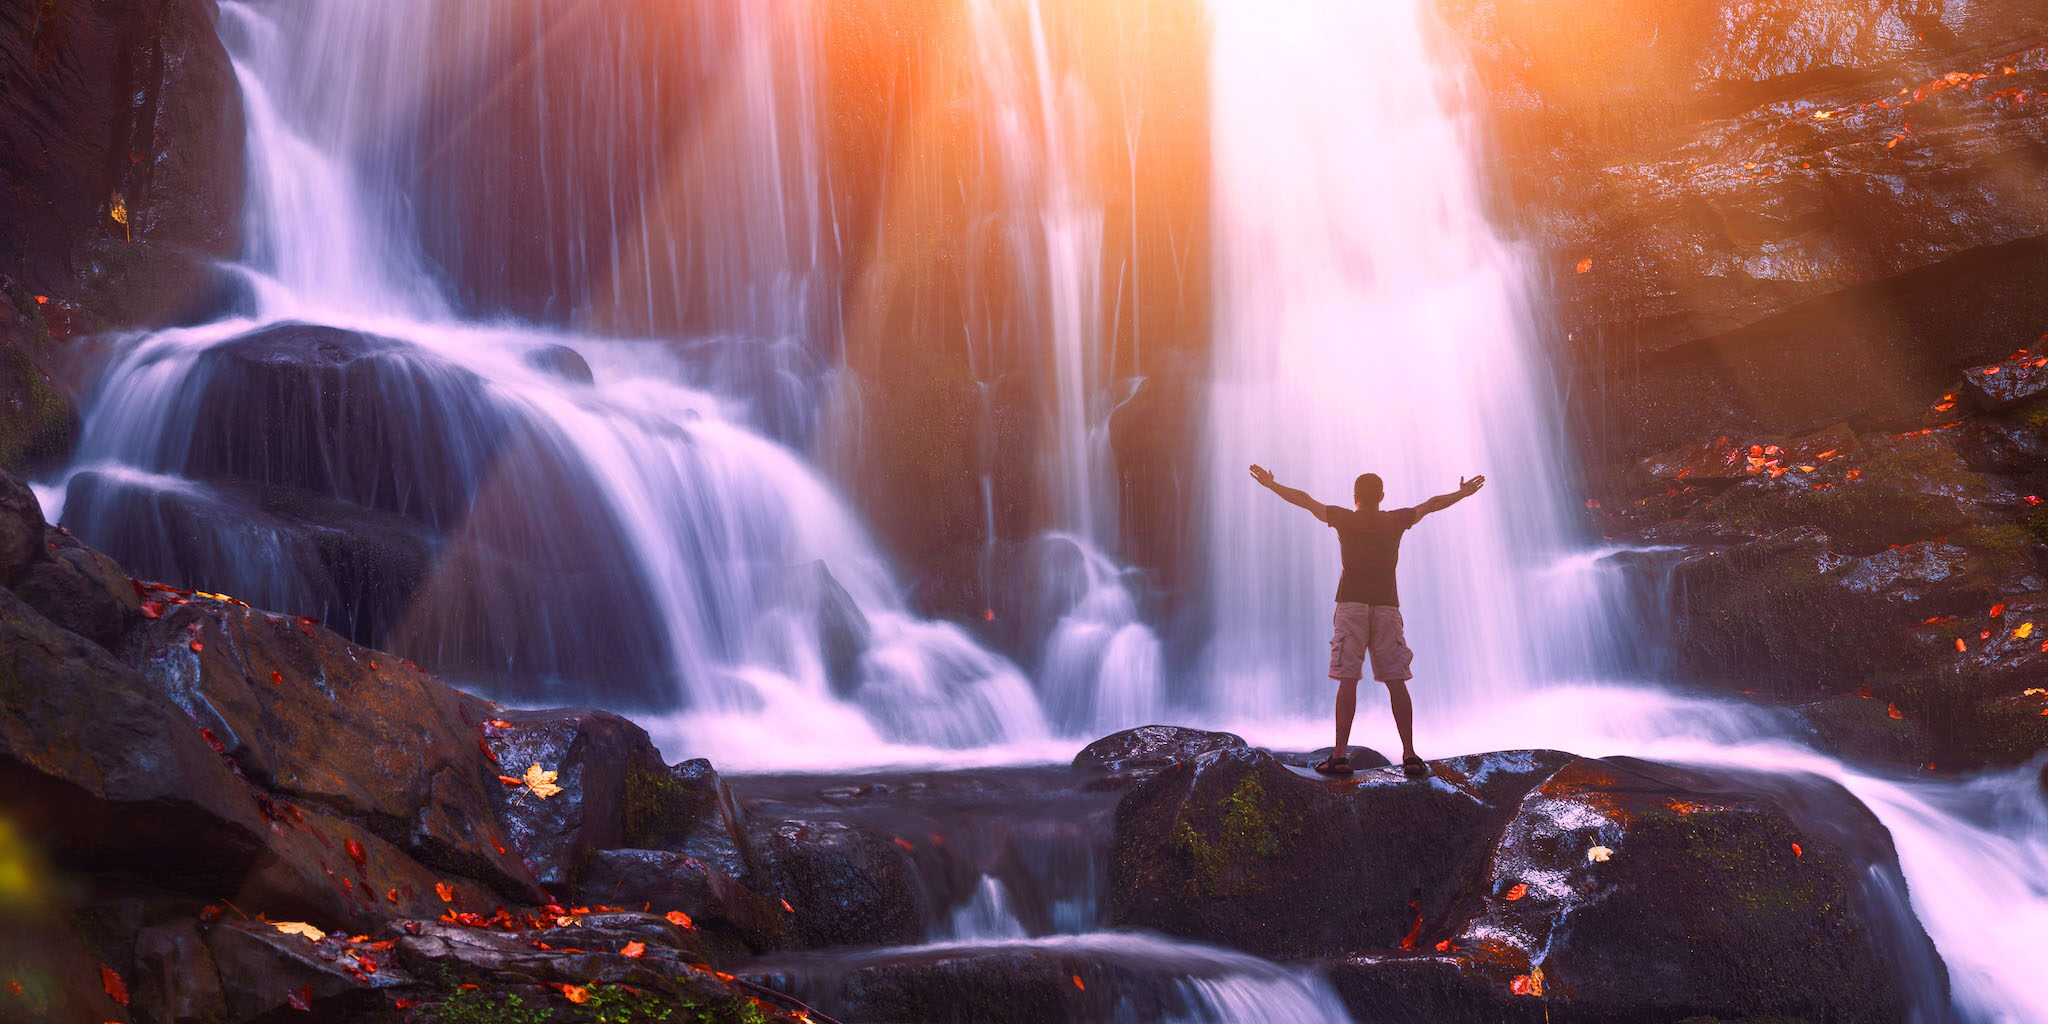 The Waterfall of Light Guided Meditation